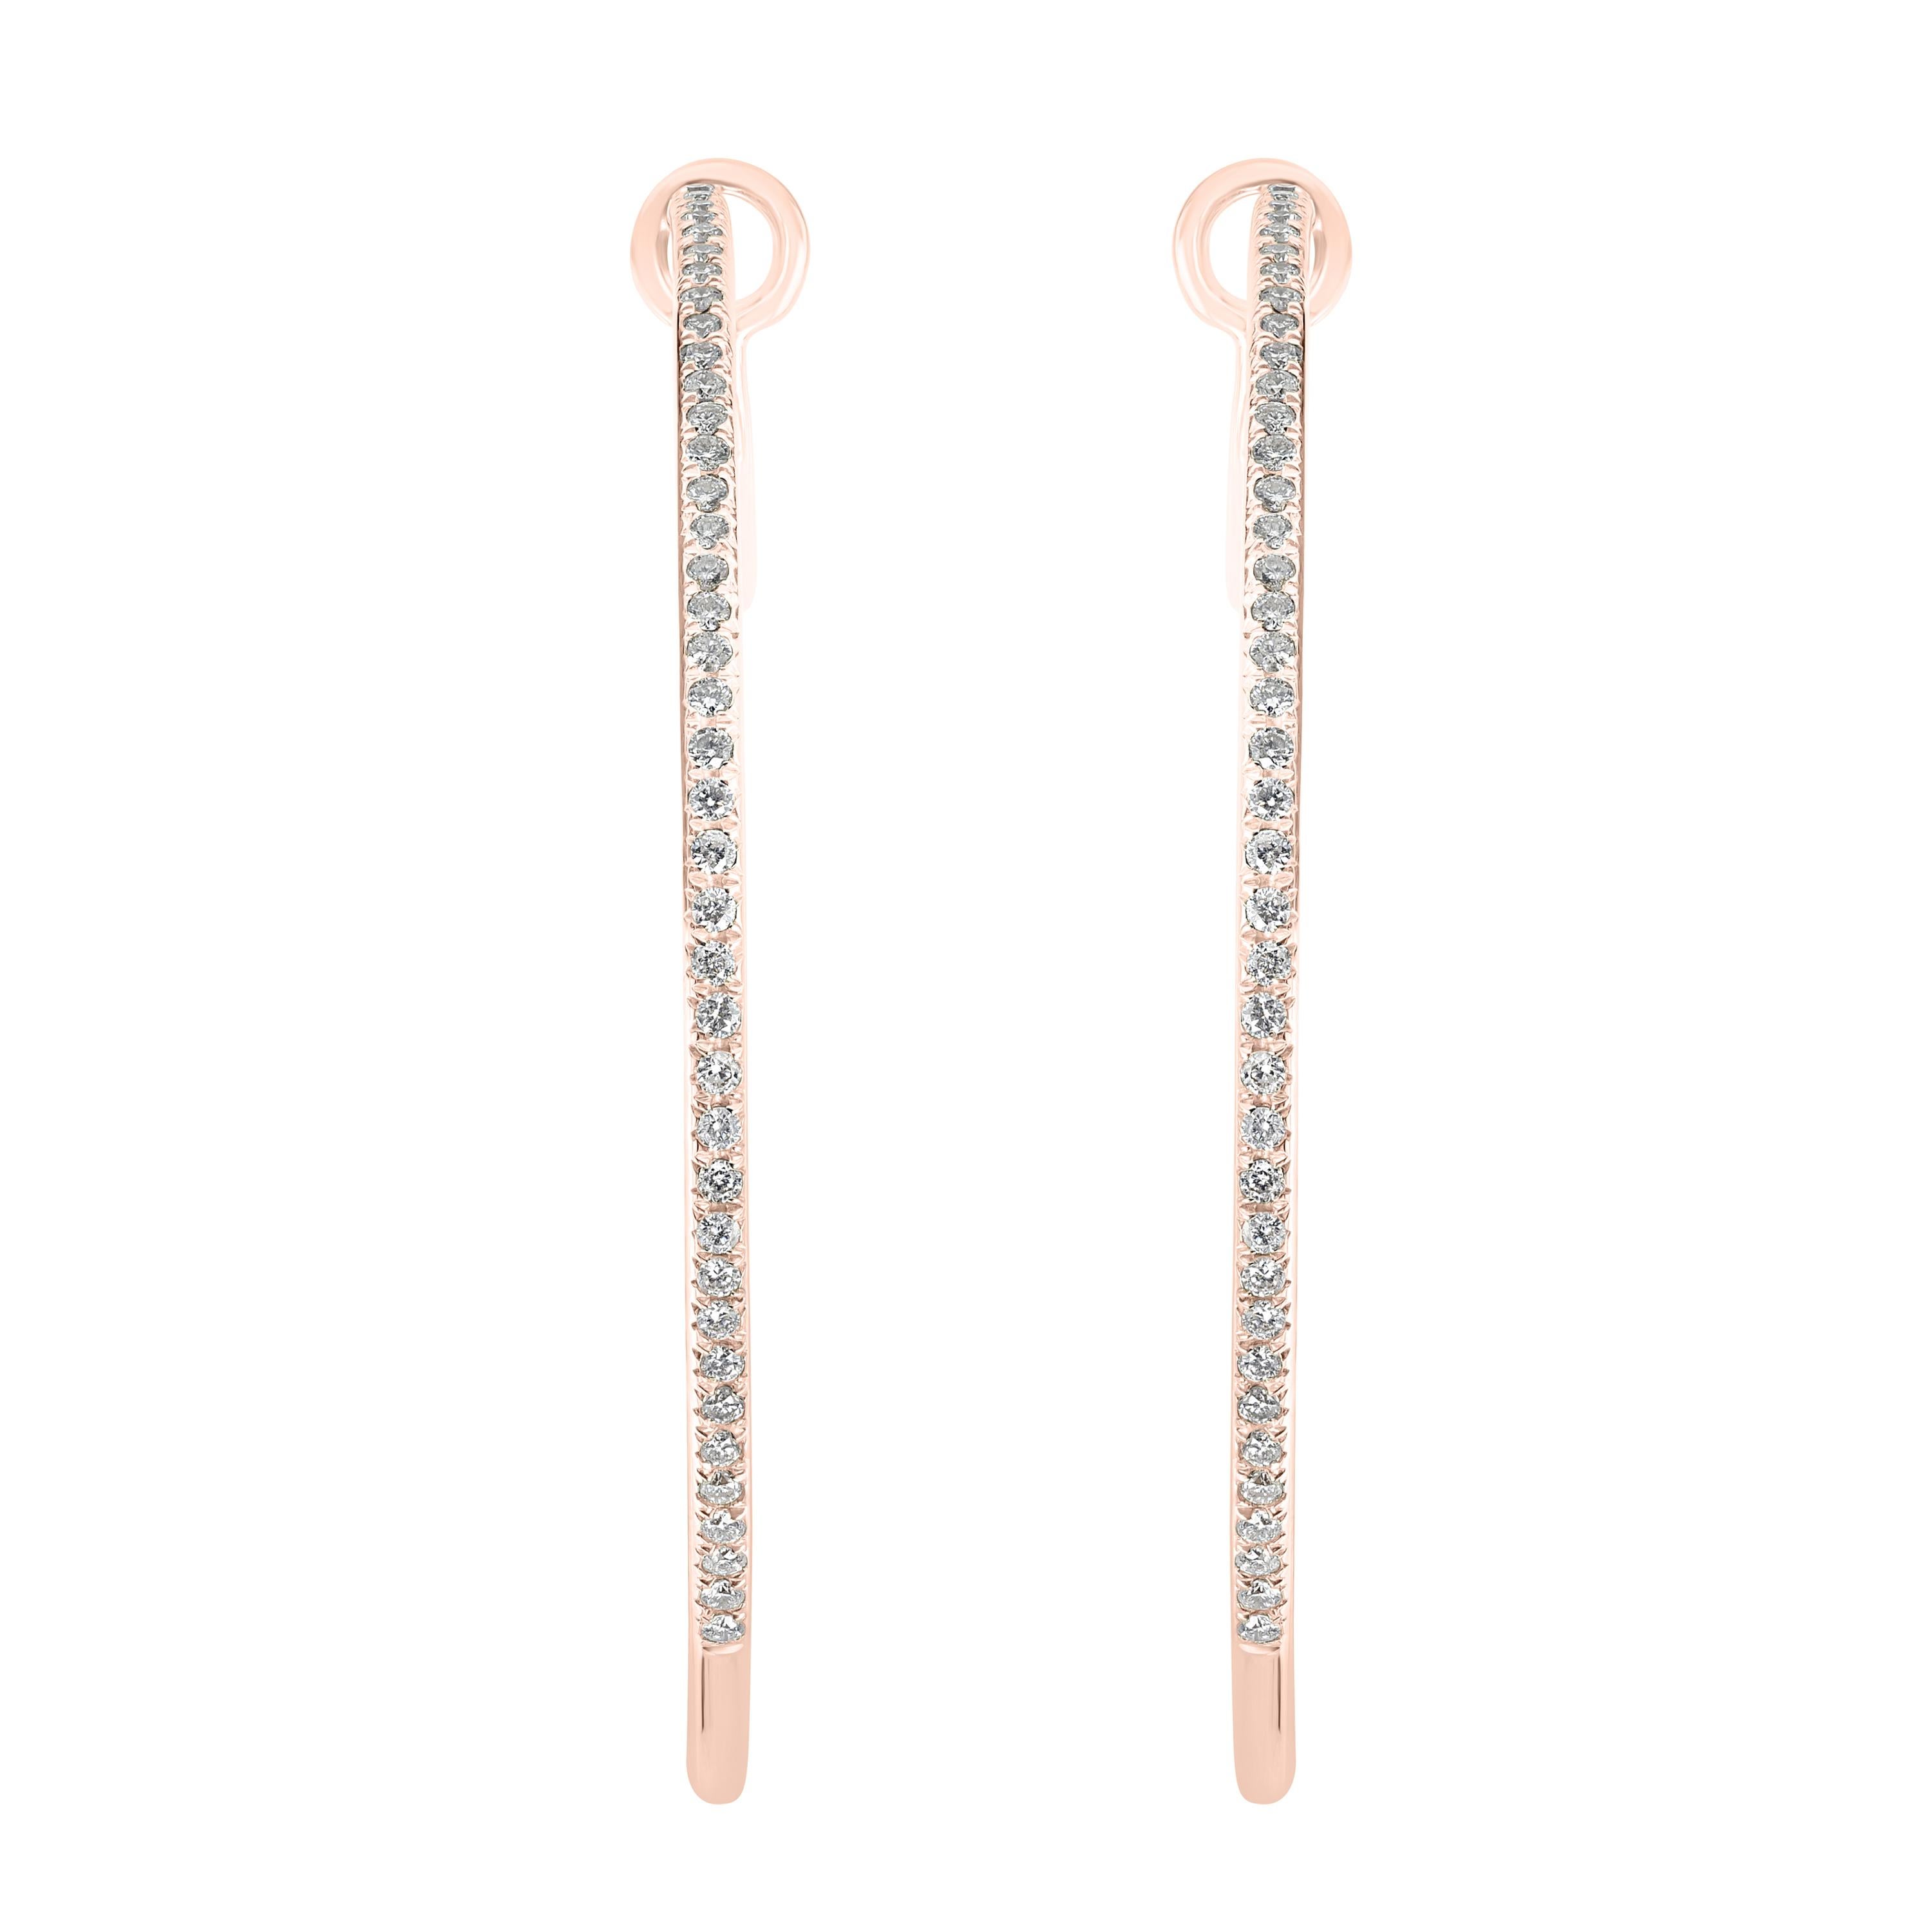 These Luxle, sparkle hoop earrings are a timeless piece of allure having 136 round single cut diamonds in a micro pave setting. Having an Omega back, the rose gold hoop earrings have diamonds weighing 0.73 cwt. The diamonds are SI in clarity and GH